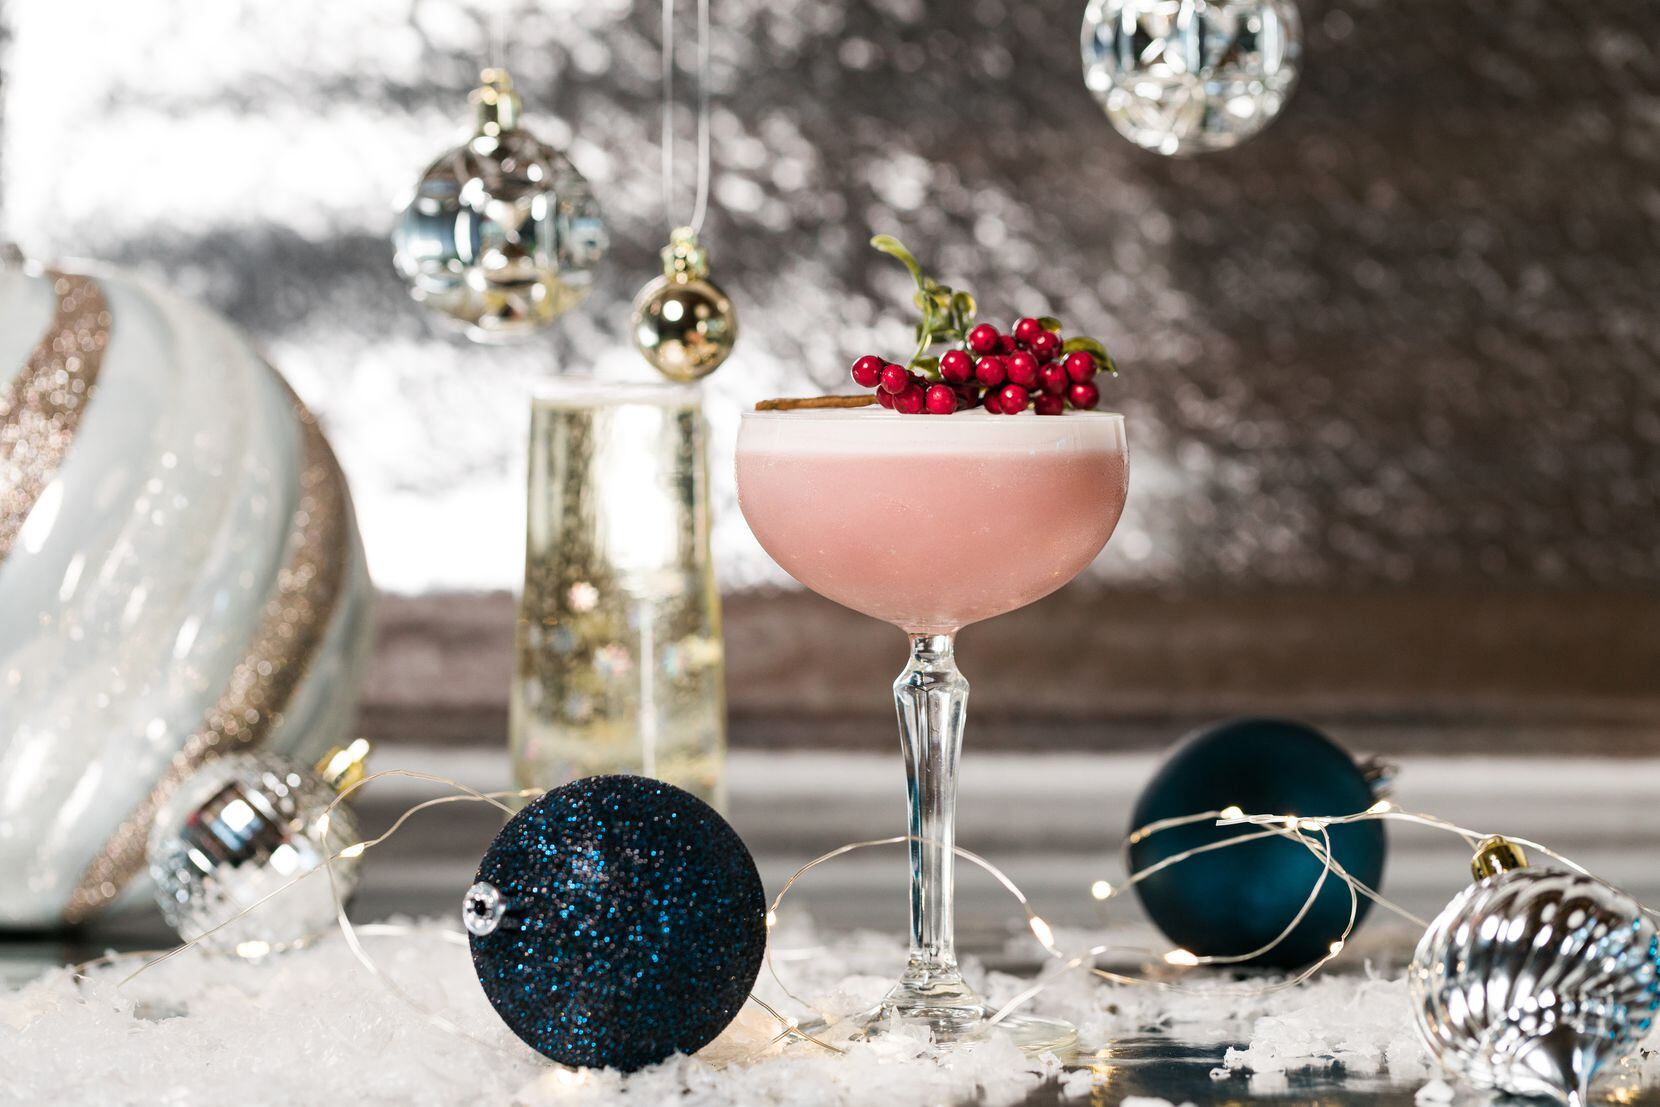 The Henry offers the festive cocktails as part of its holiday menu.